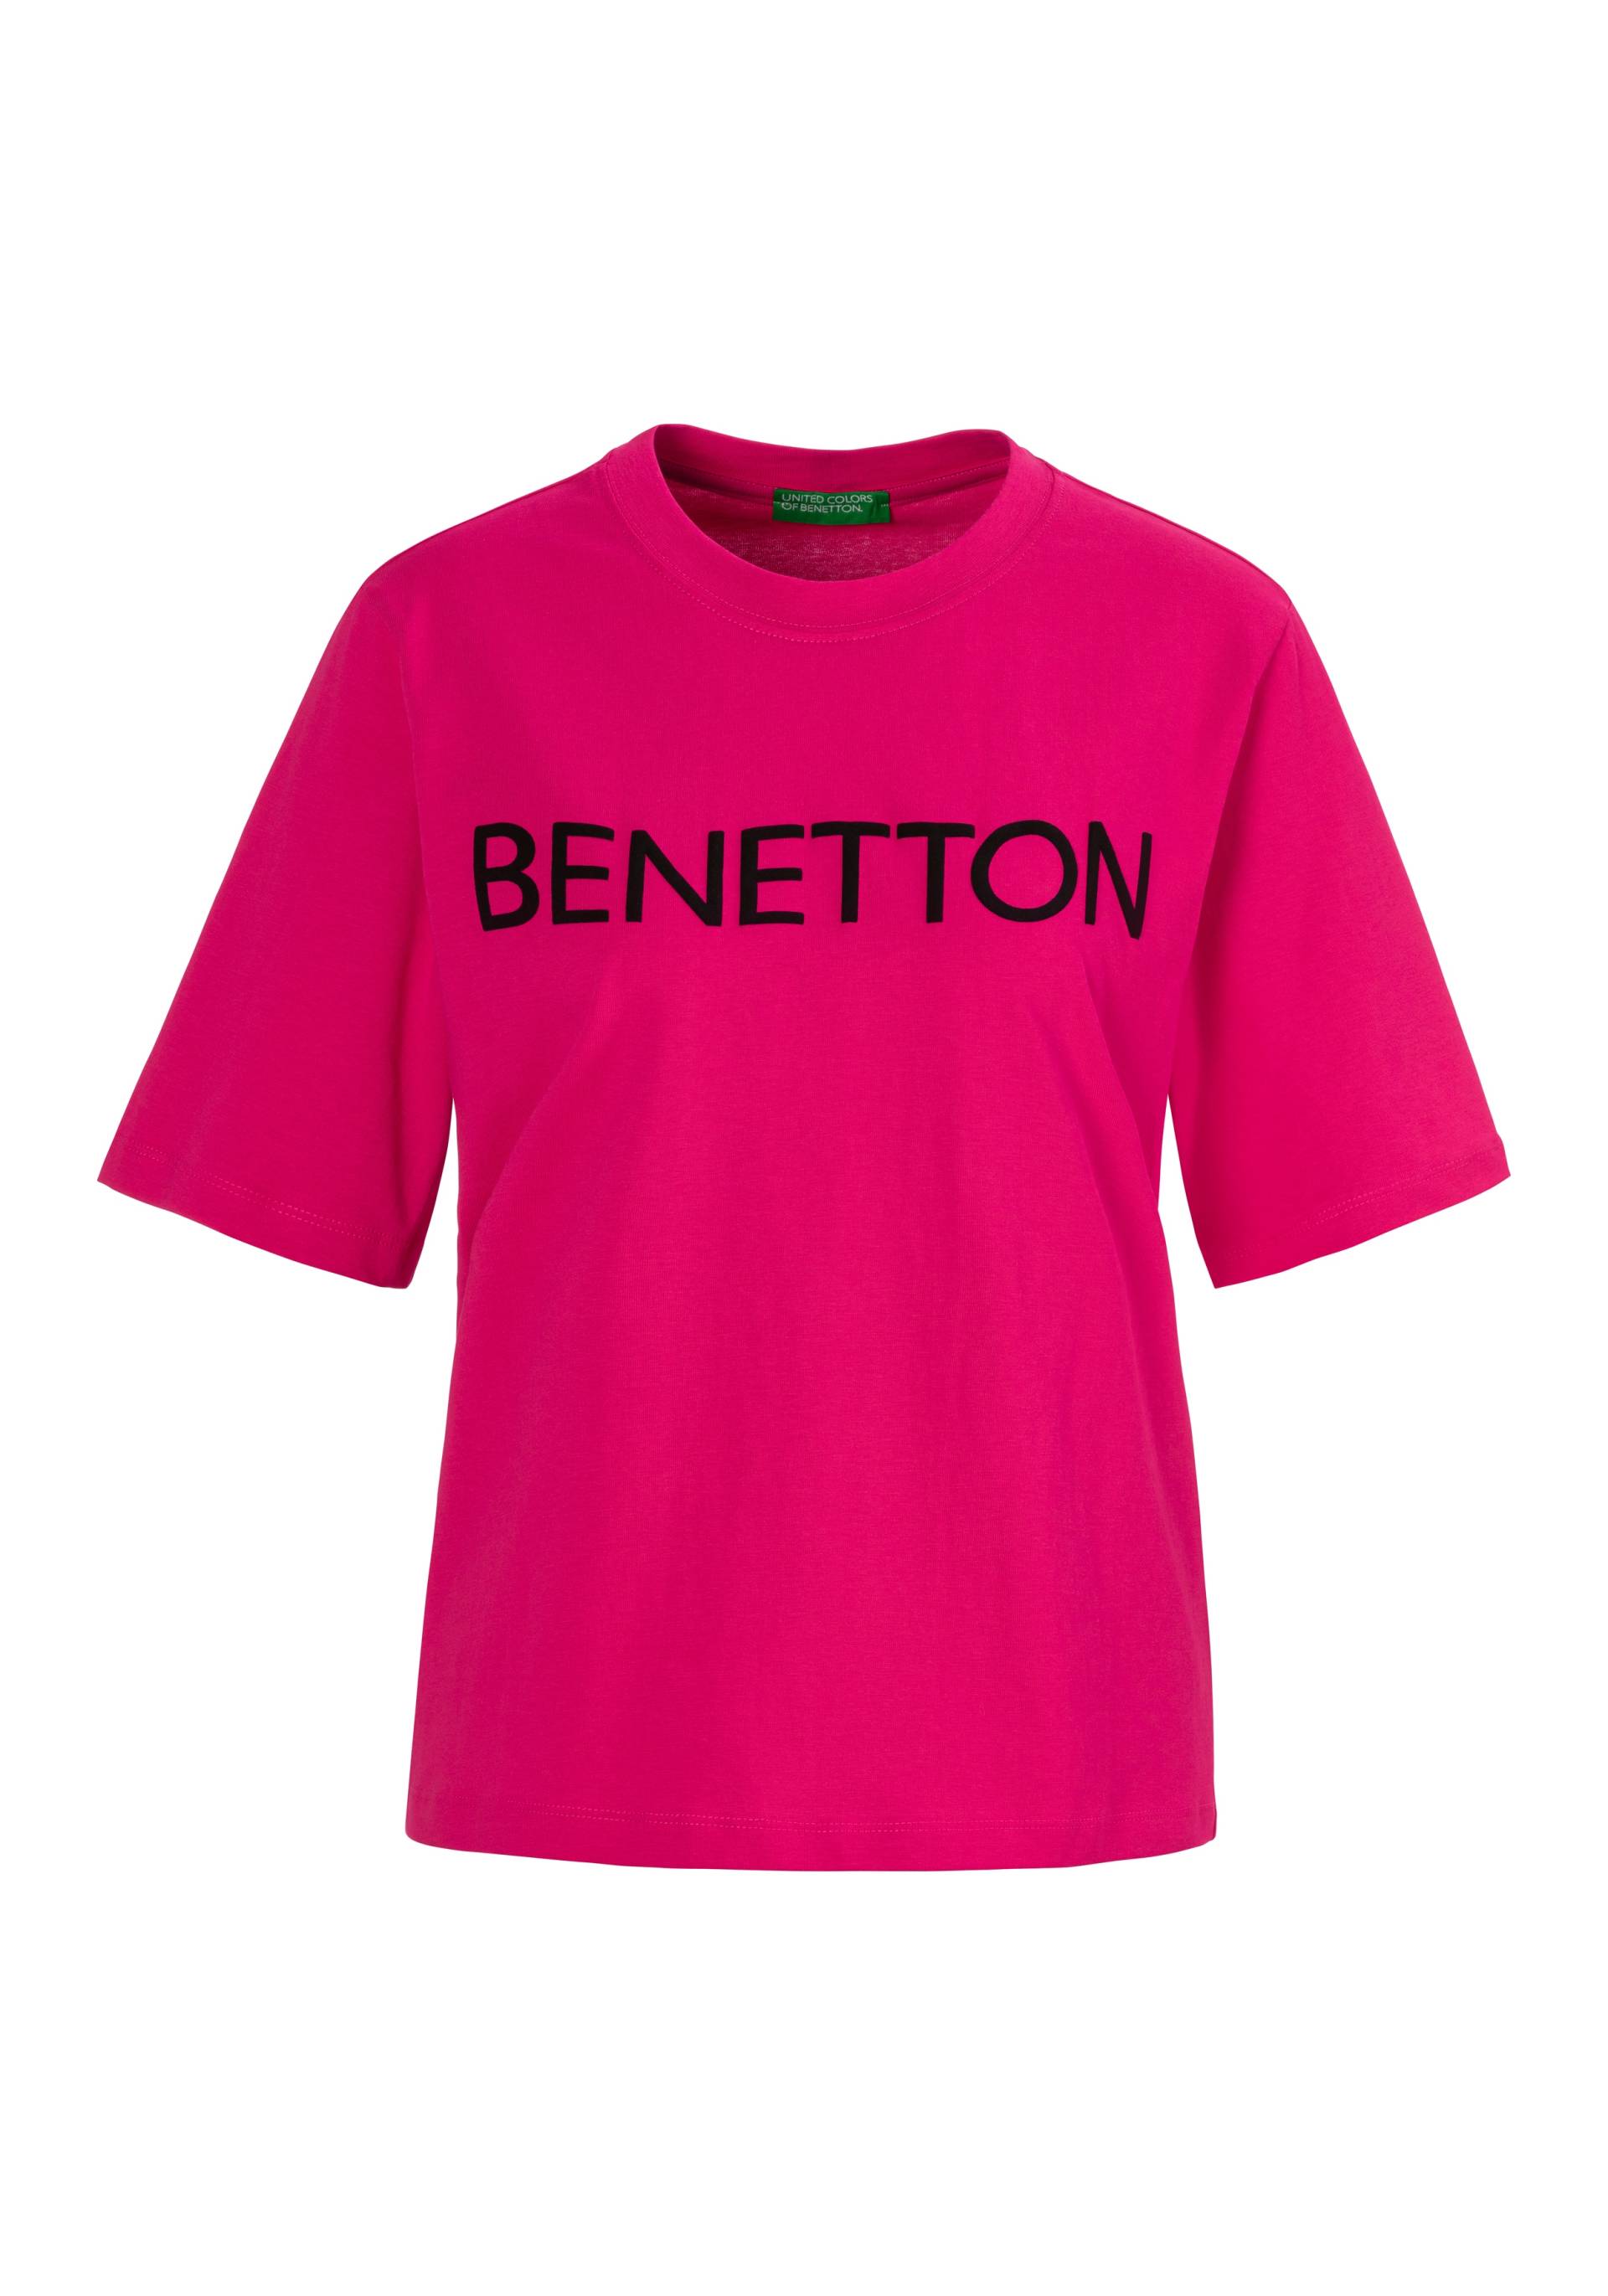 United Colors of Benetton T-Shirt, mit Rundhalsausschnitt von United Colors of Benetton